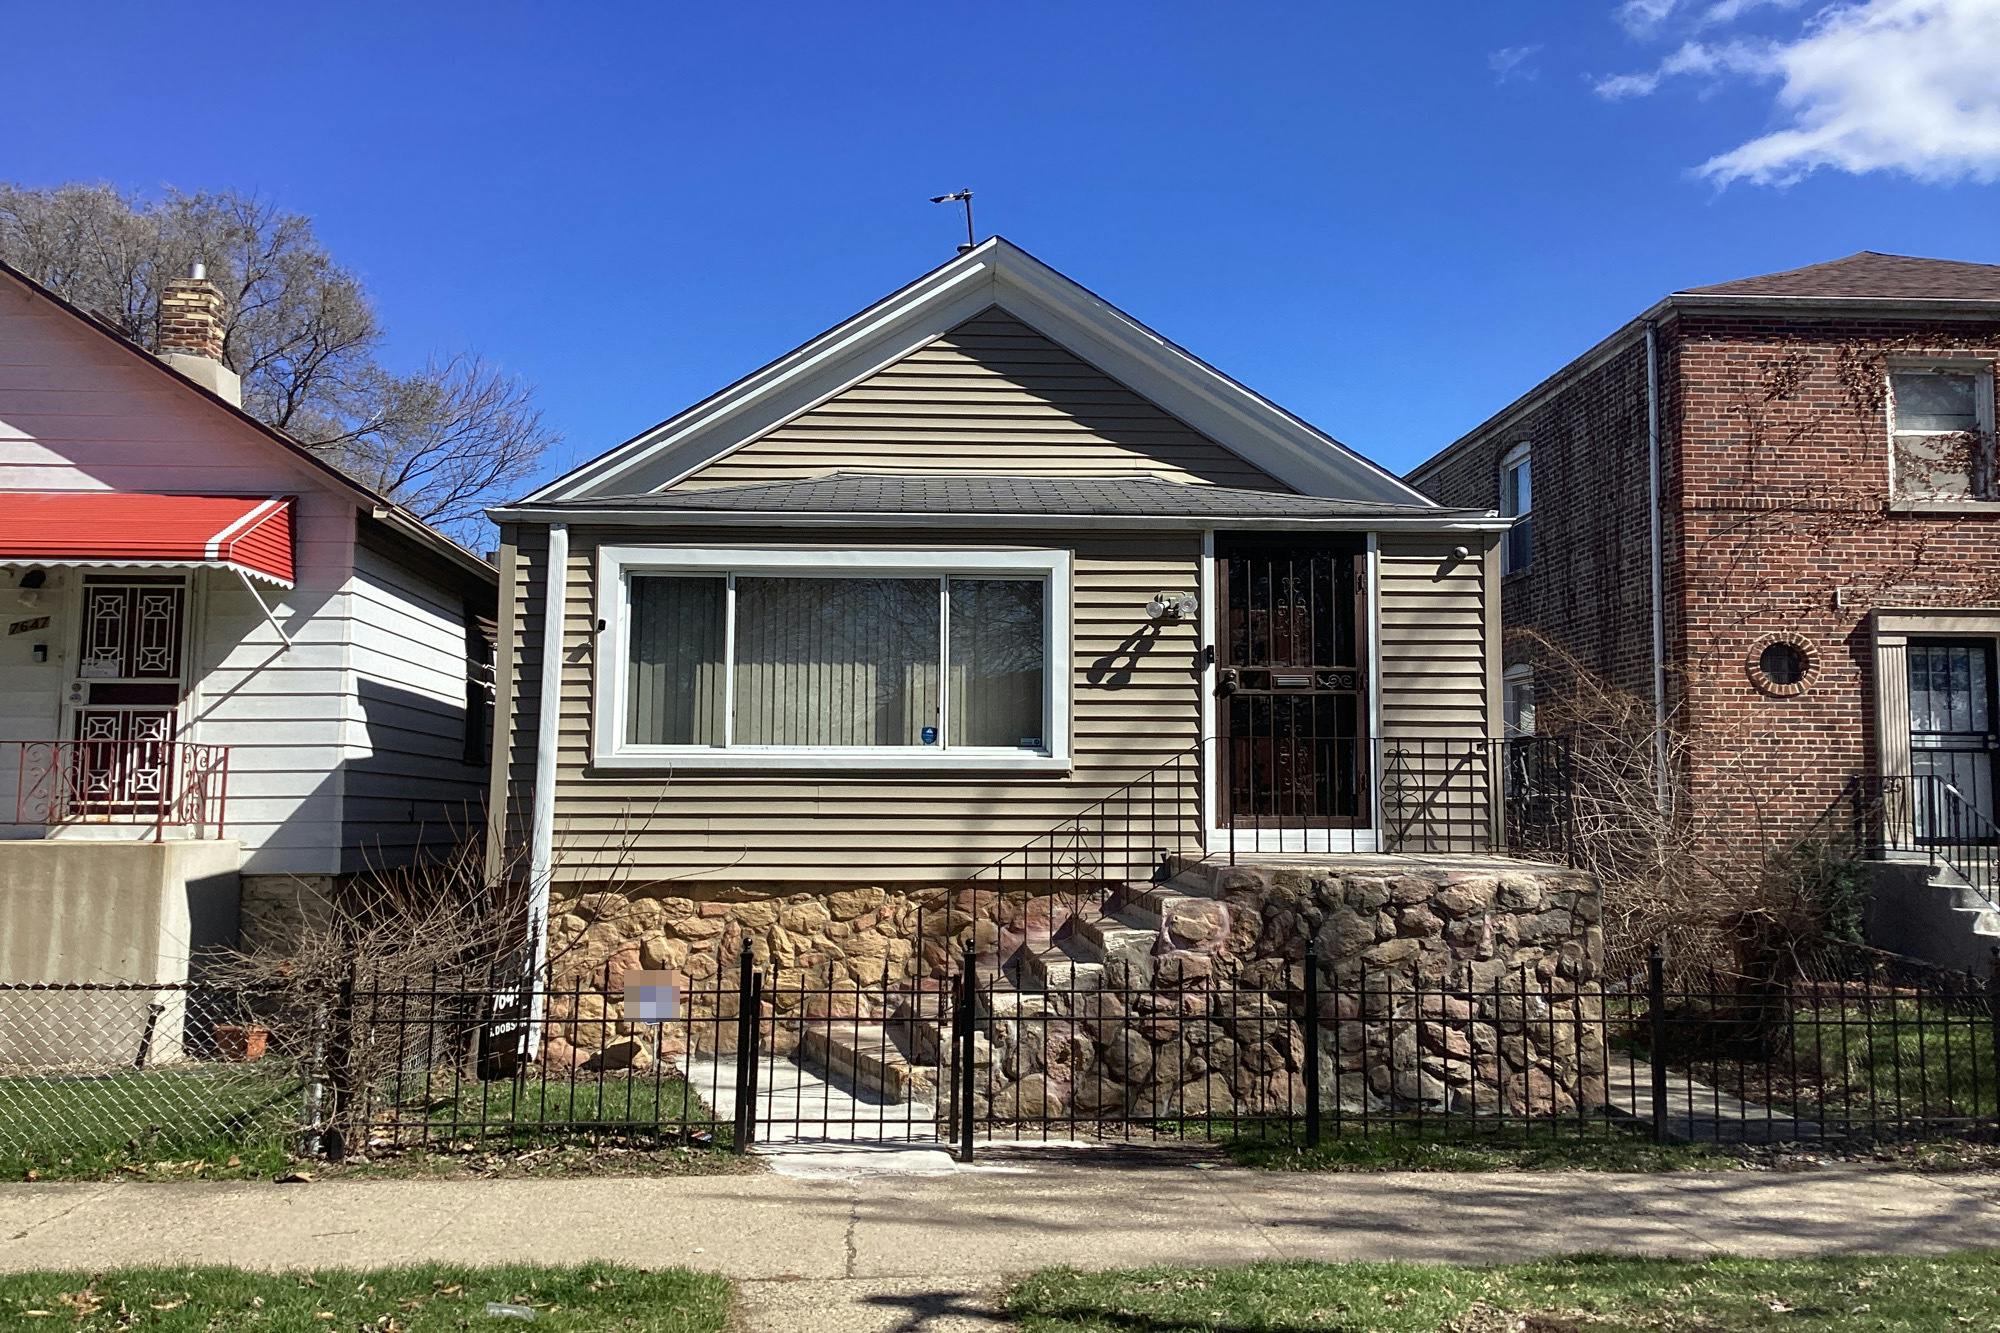 Dobson Ave, Chicago, IL 60619 #1